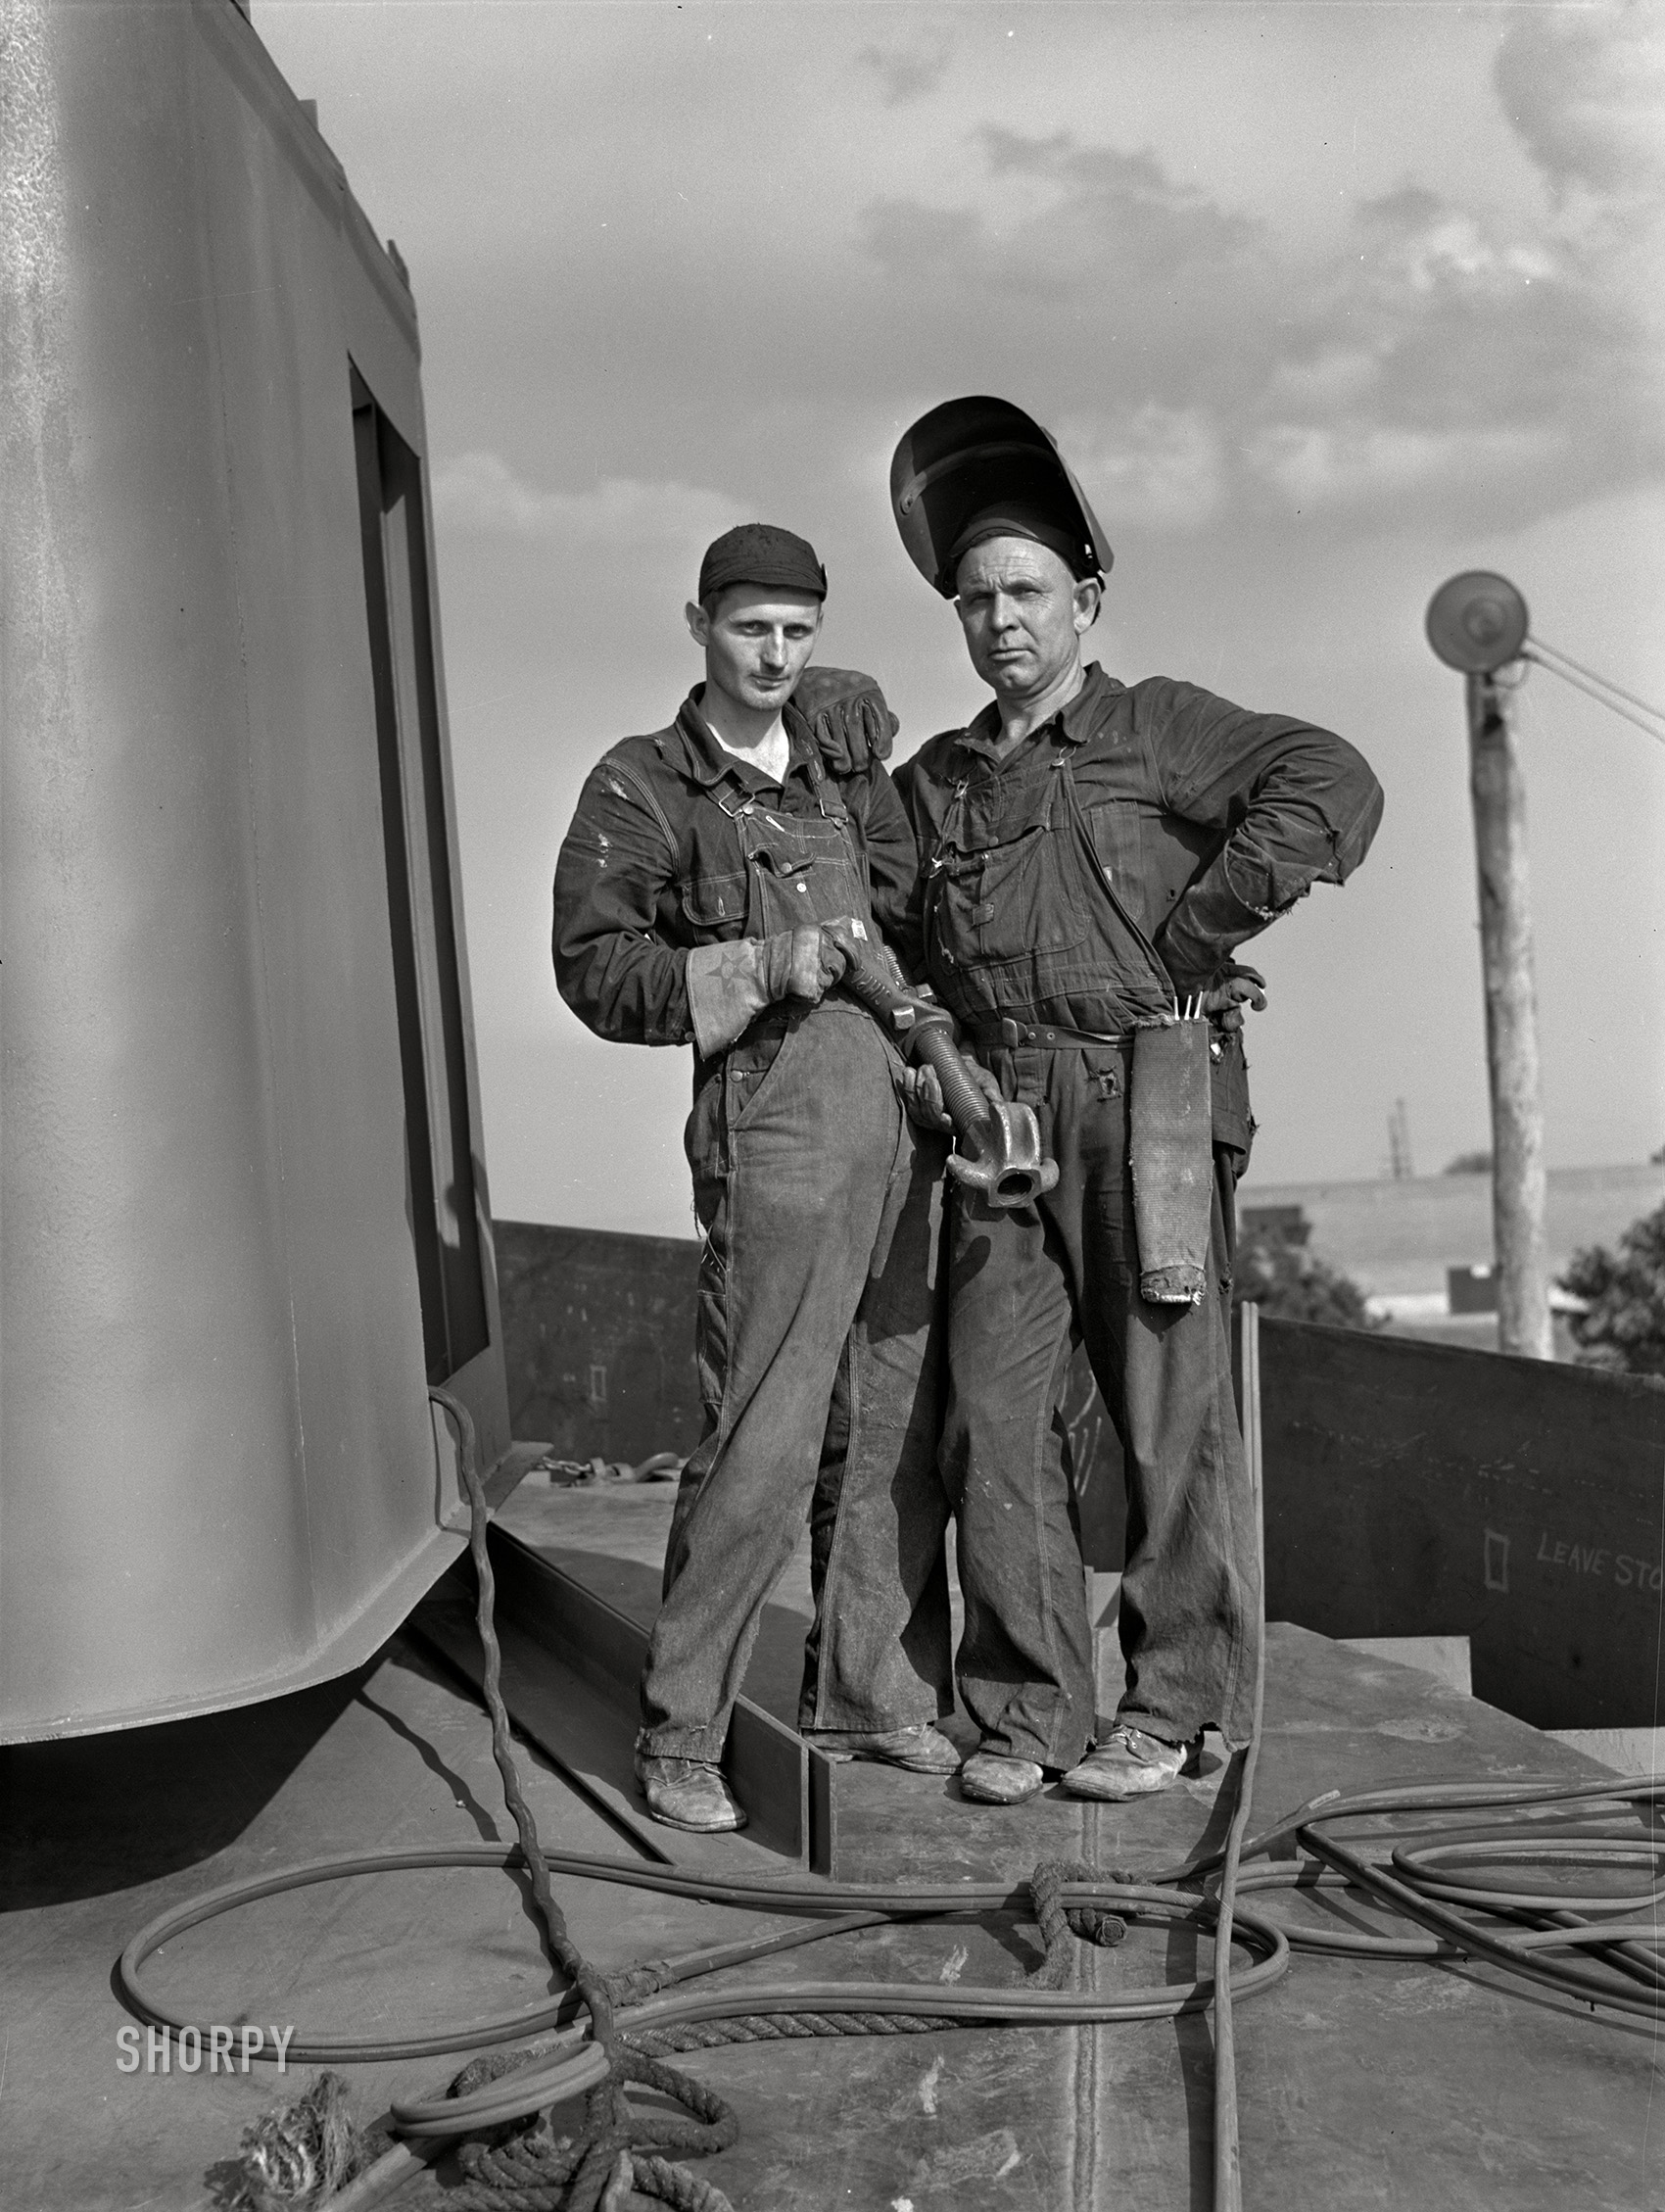 July 1942. "Decatur, Alabama. Ingalls Shipbuilding Company. Construction of ocean-going barges for the U.S. Army on the Tennessee River. A shipfitter and his helper. They are C.R. Willingham (right) and E.L. Sparkman." Acetate negative by Jack Delano. View full size.